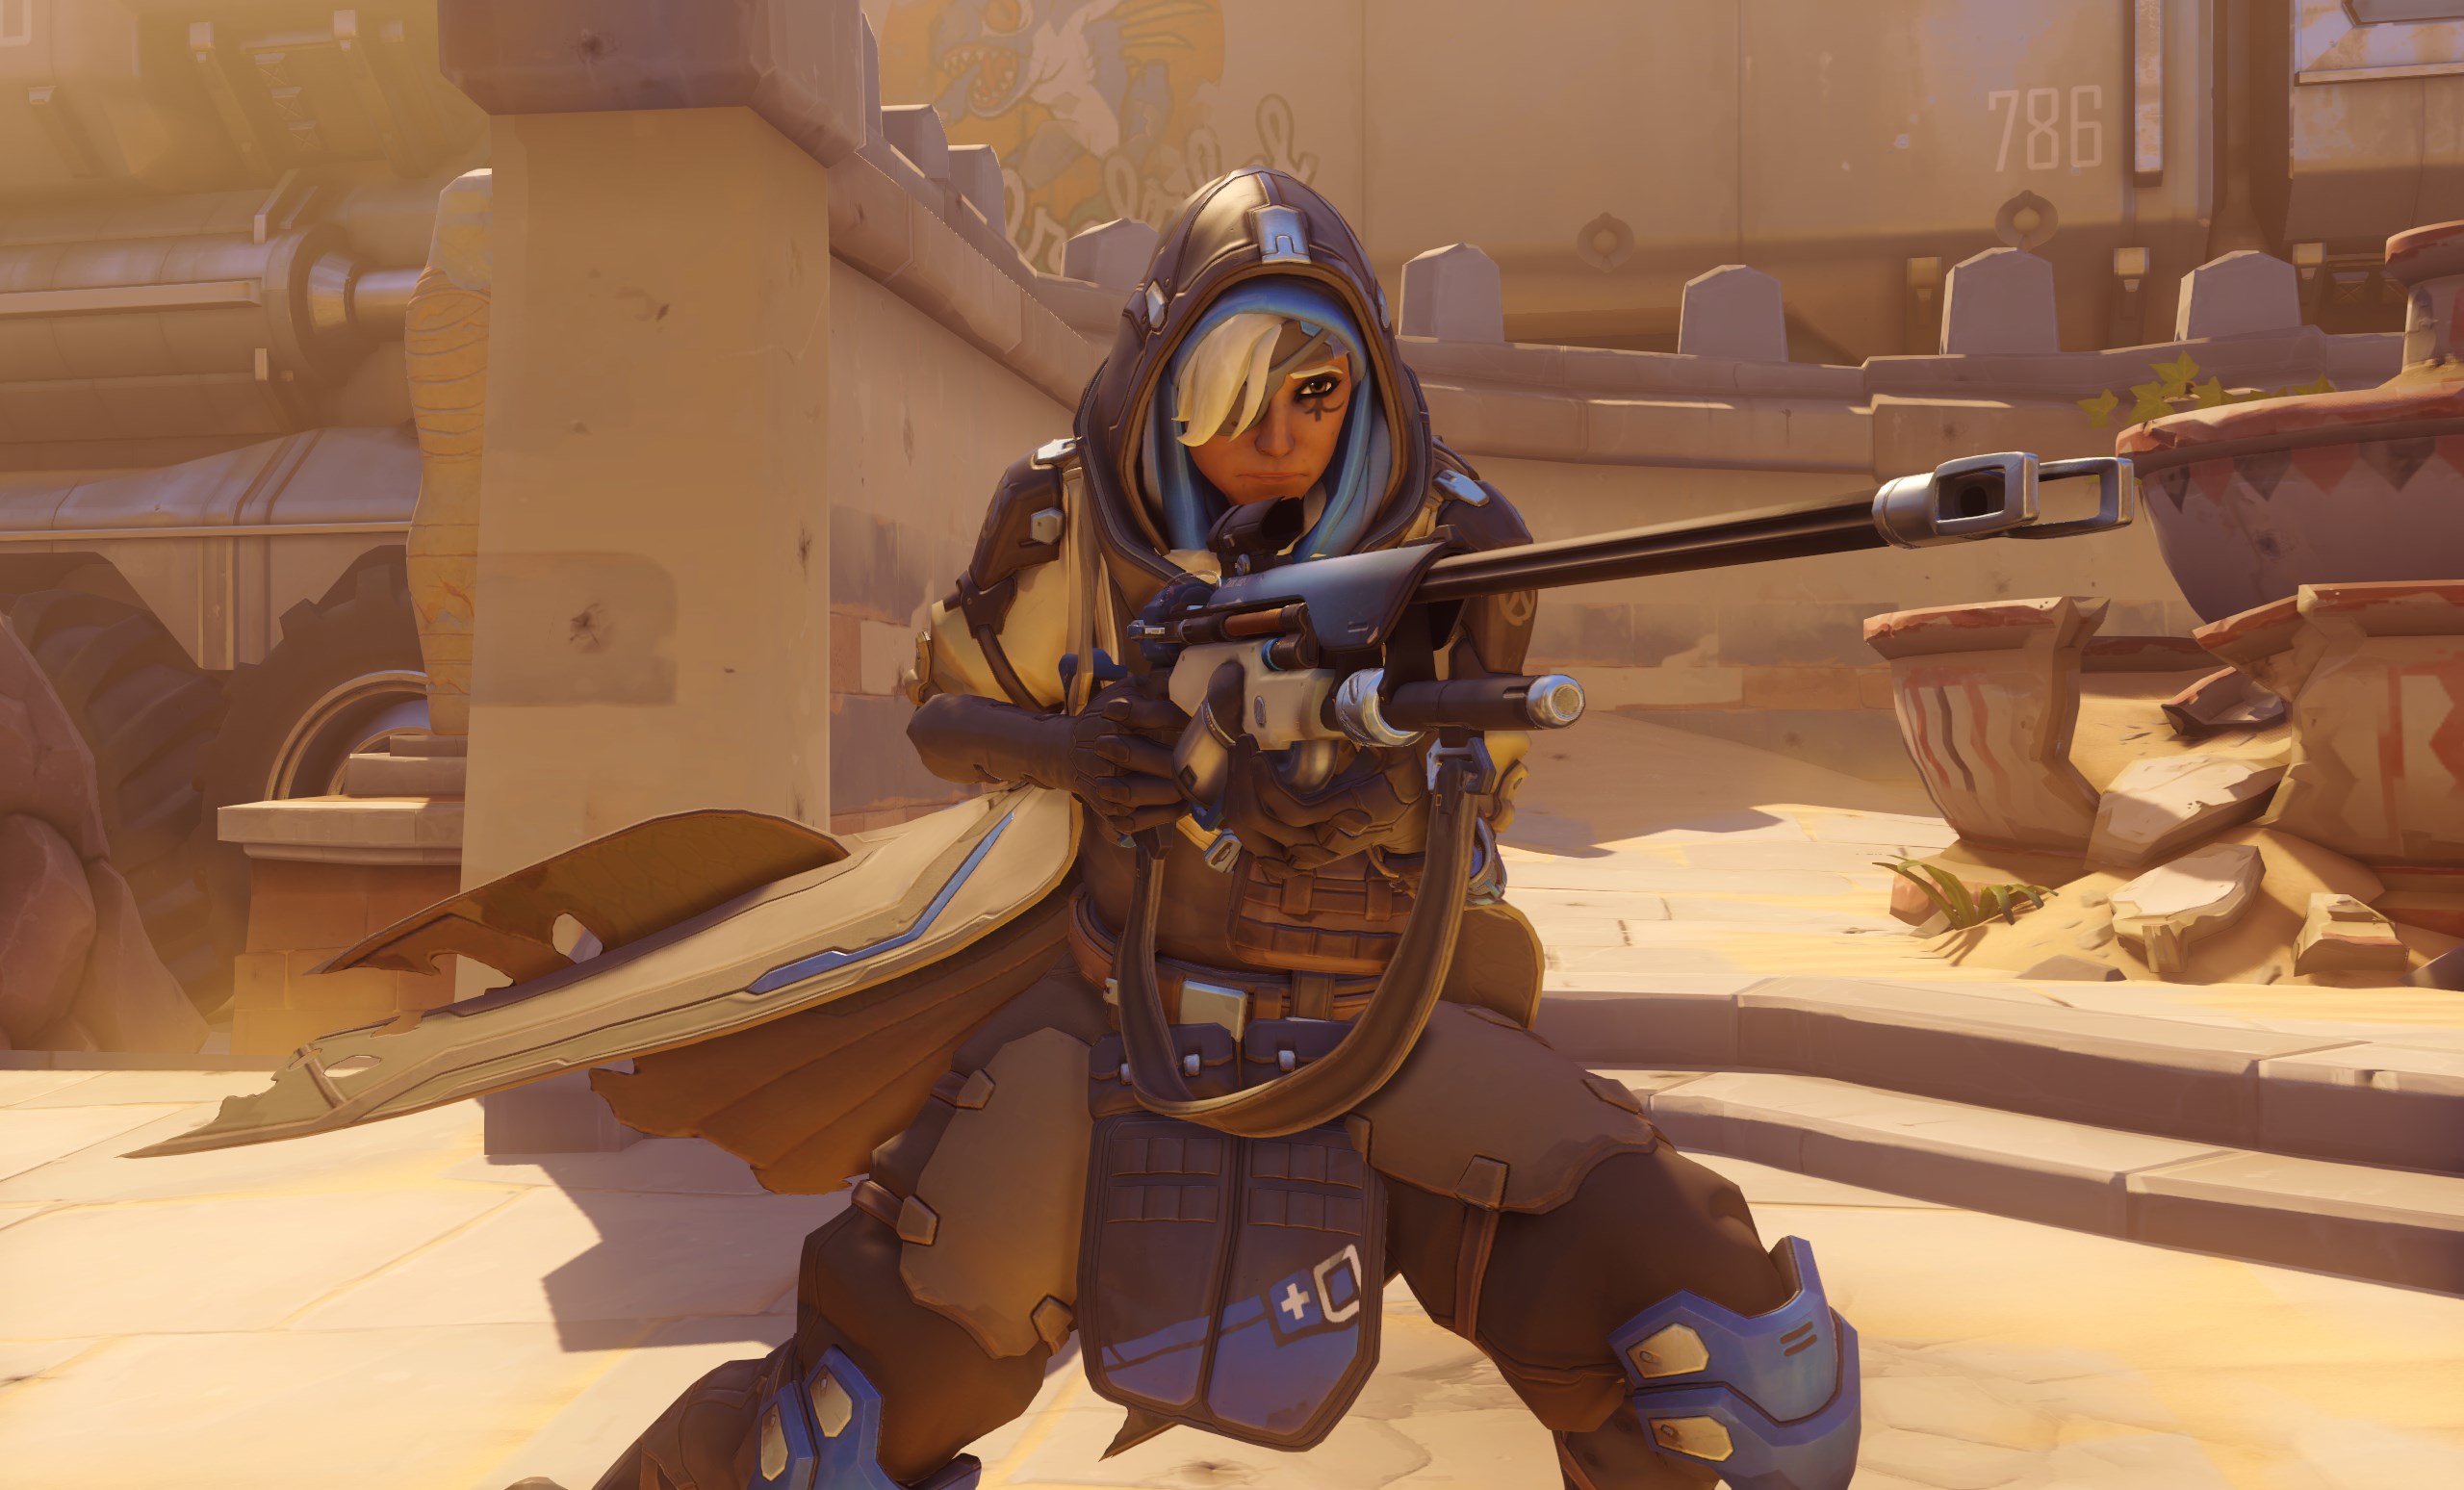 Meet Ana, Overwatch’s first new character since launch.